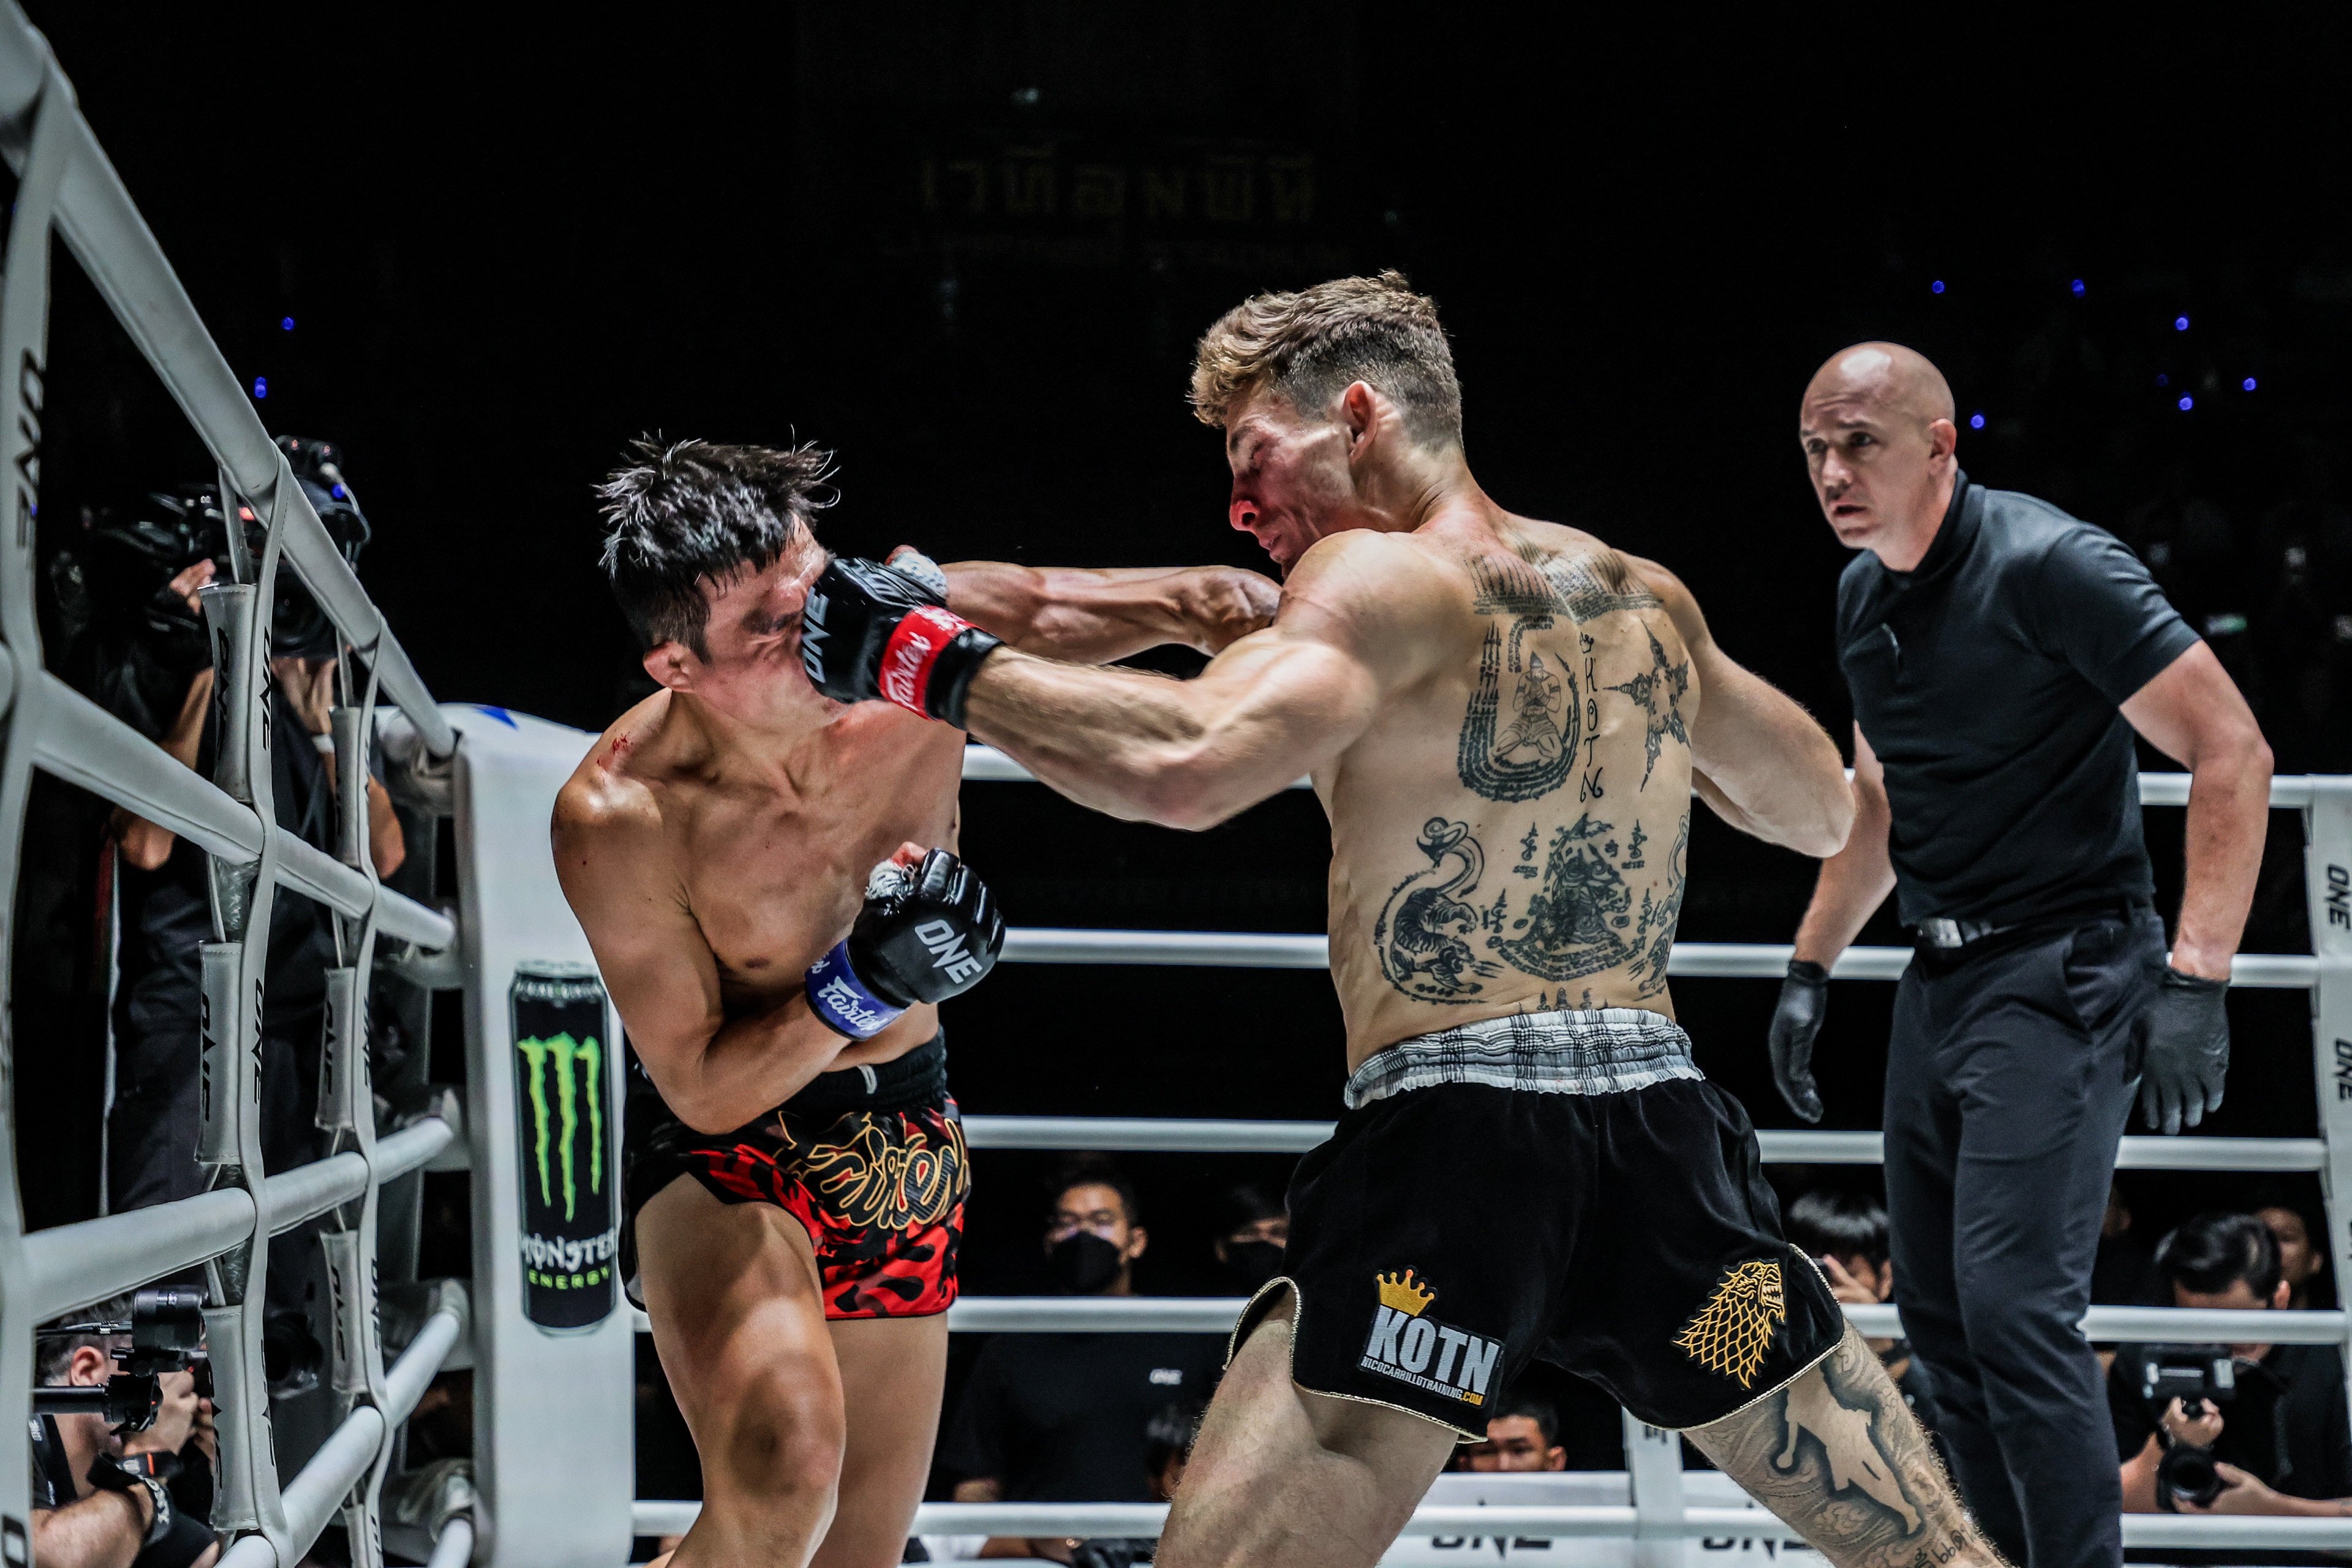 Nico Carrillo connects with a hard left during his fight against Saemapetch Fairtex at ONE Fight Night 23. Photo: ONE Championship